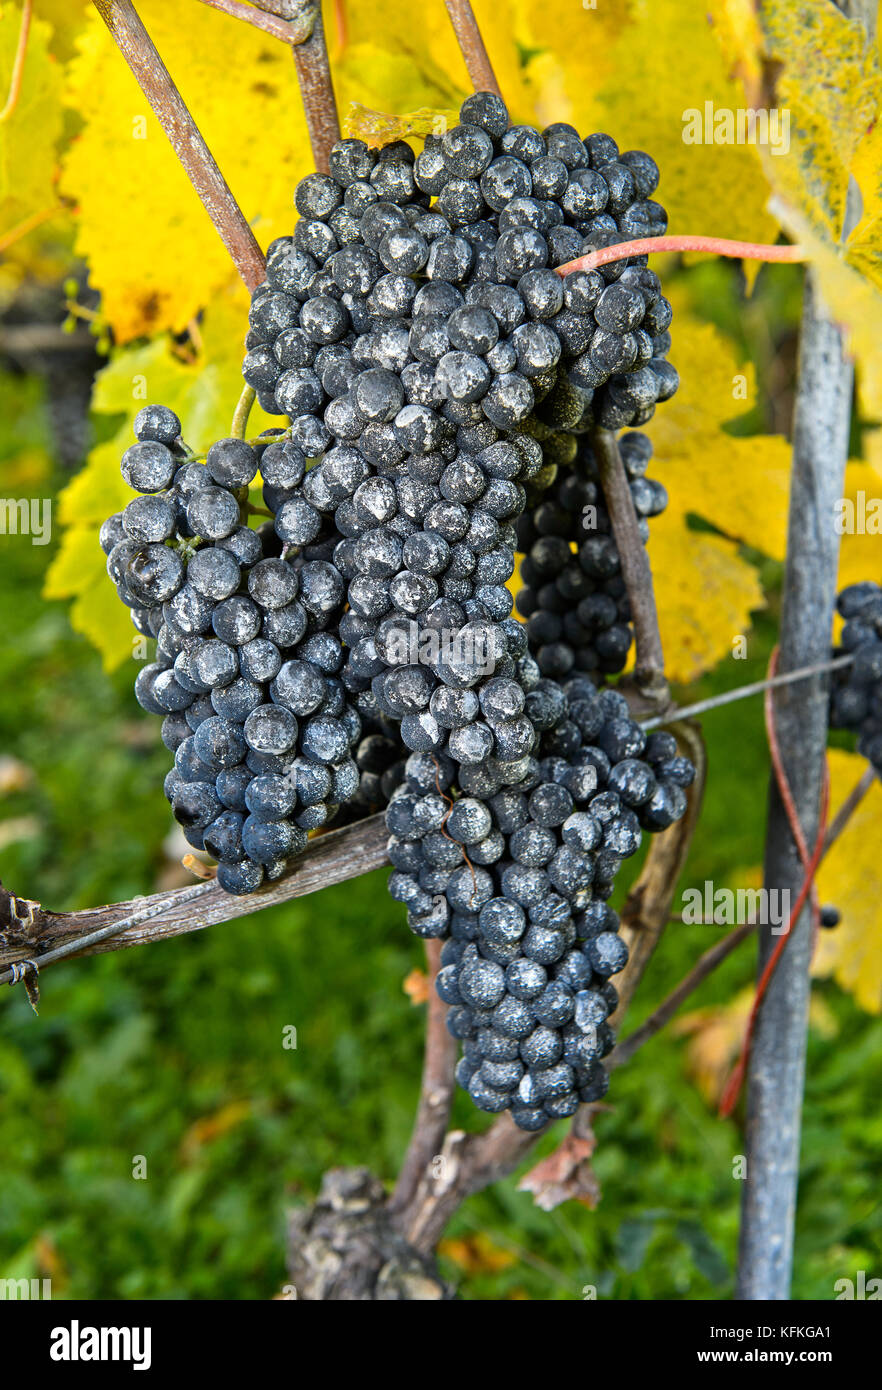 Kaolin coating on grapes as a natural pesticide in organic cultivation against spotted wing drosophila (Drosophila suzukii) Stock Photo